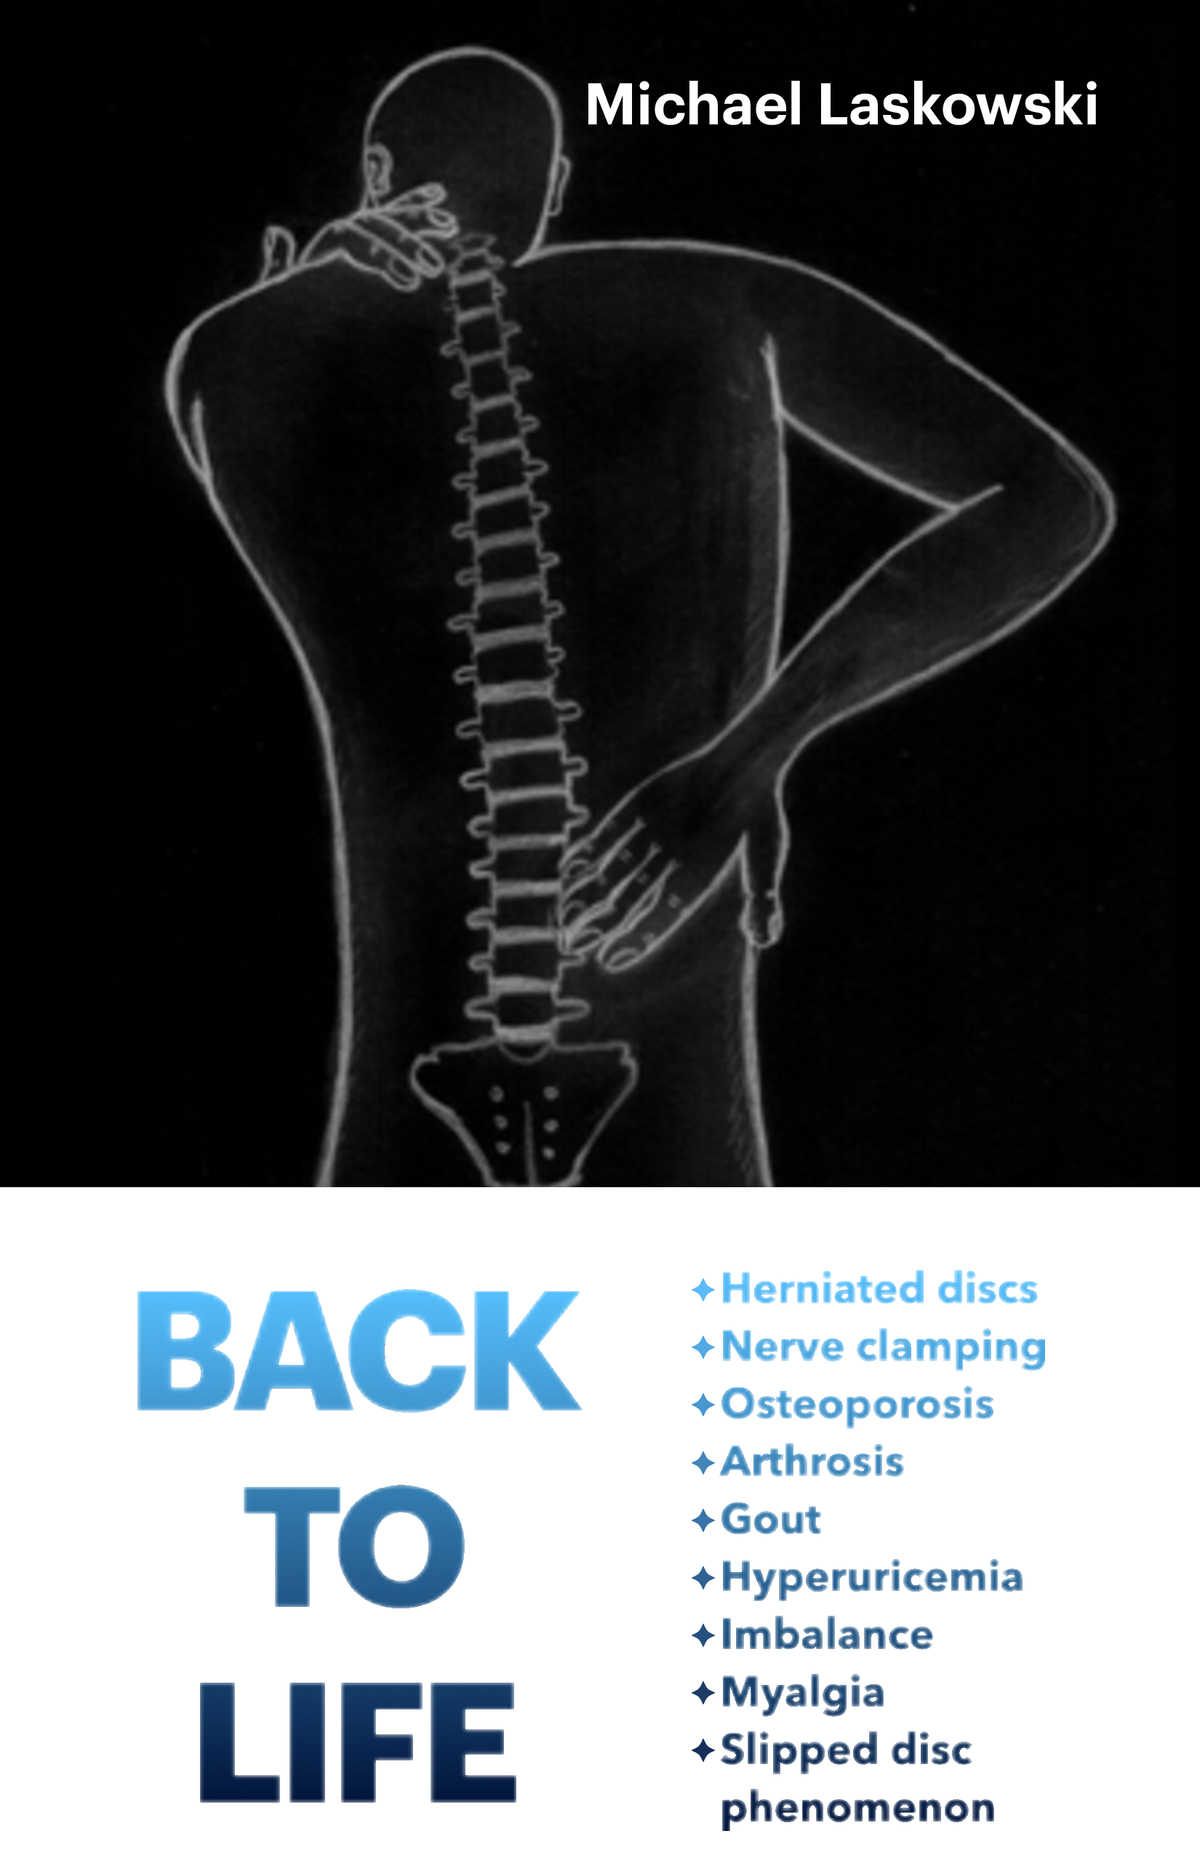 Back to life - Back and joint disorders